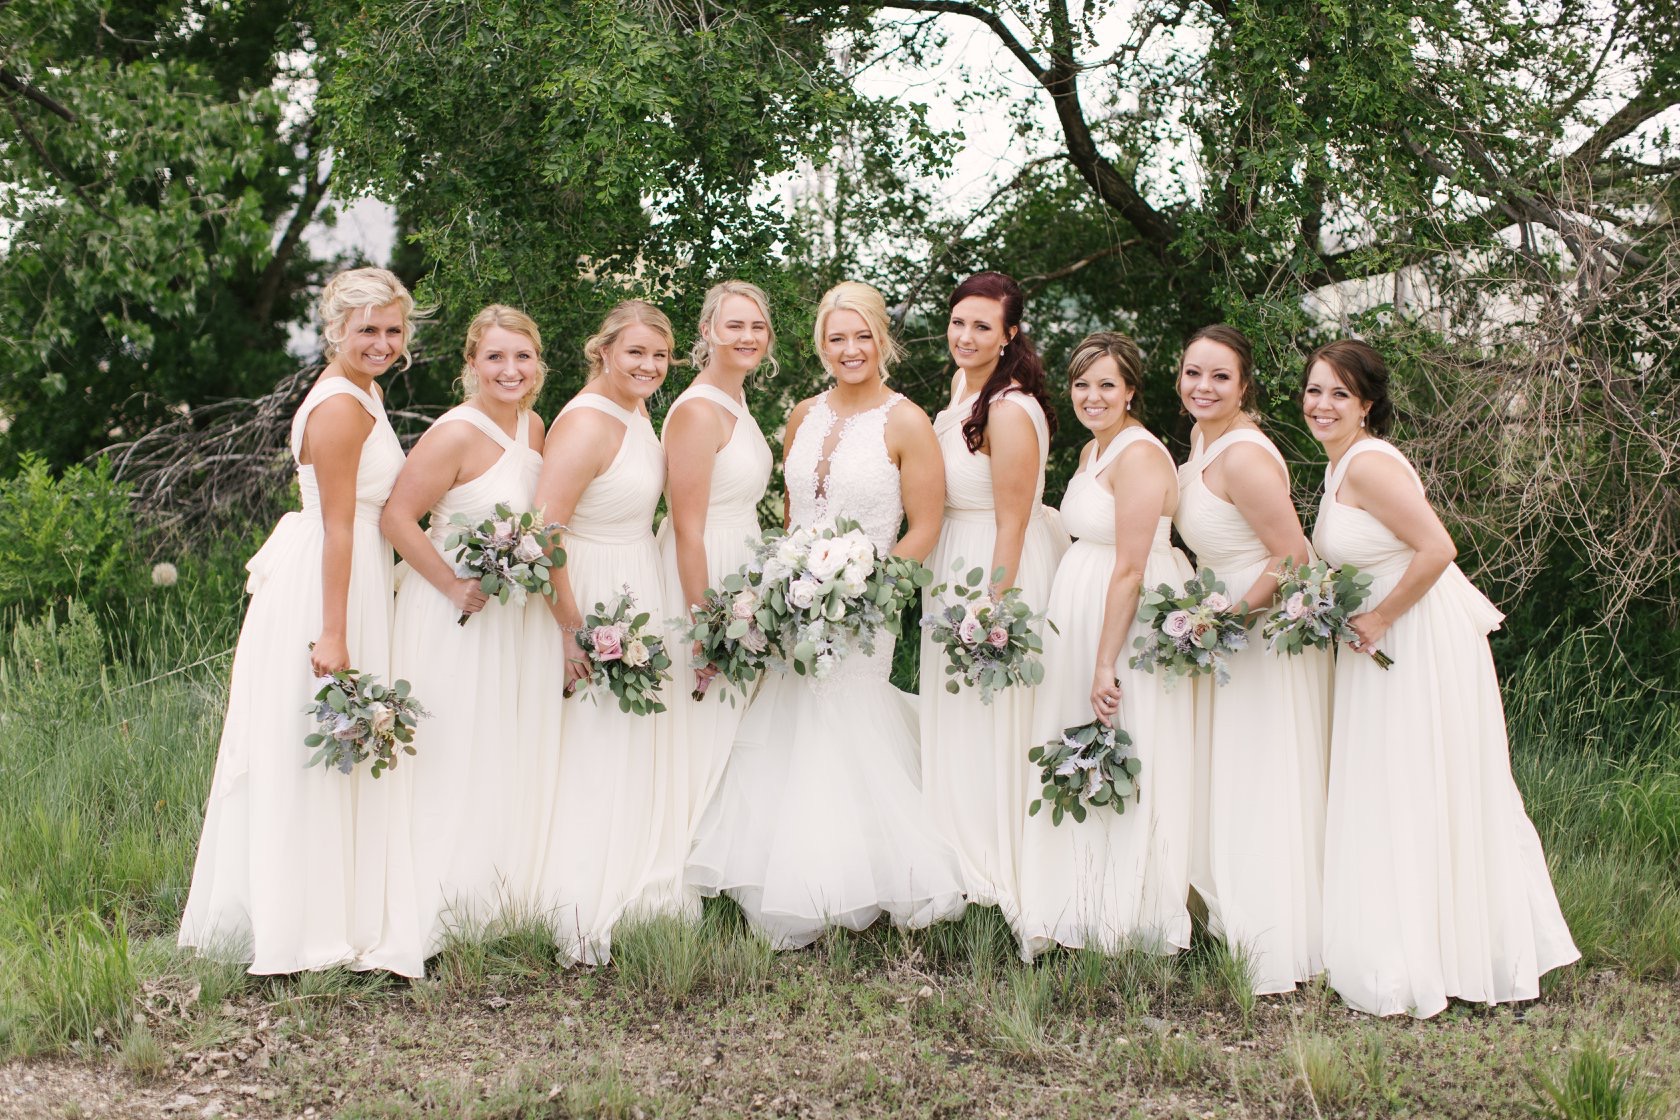 Real Bride Wearing Veda Wedding Dress with Bridesmaids Wearing White Dresses